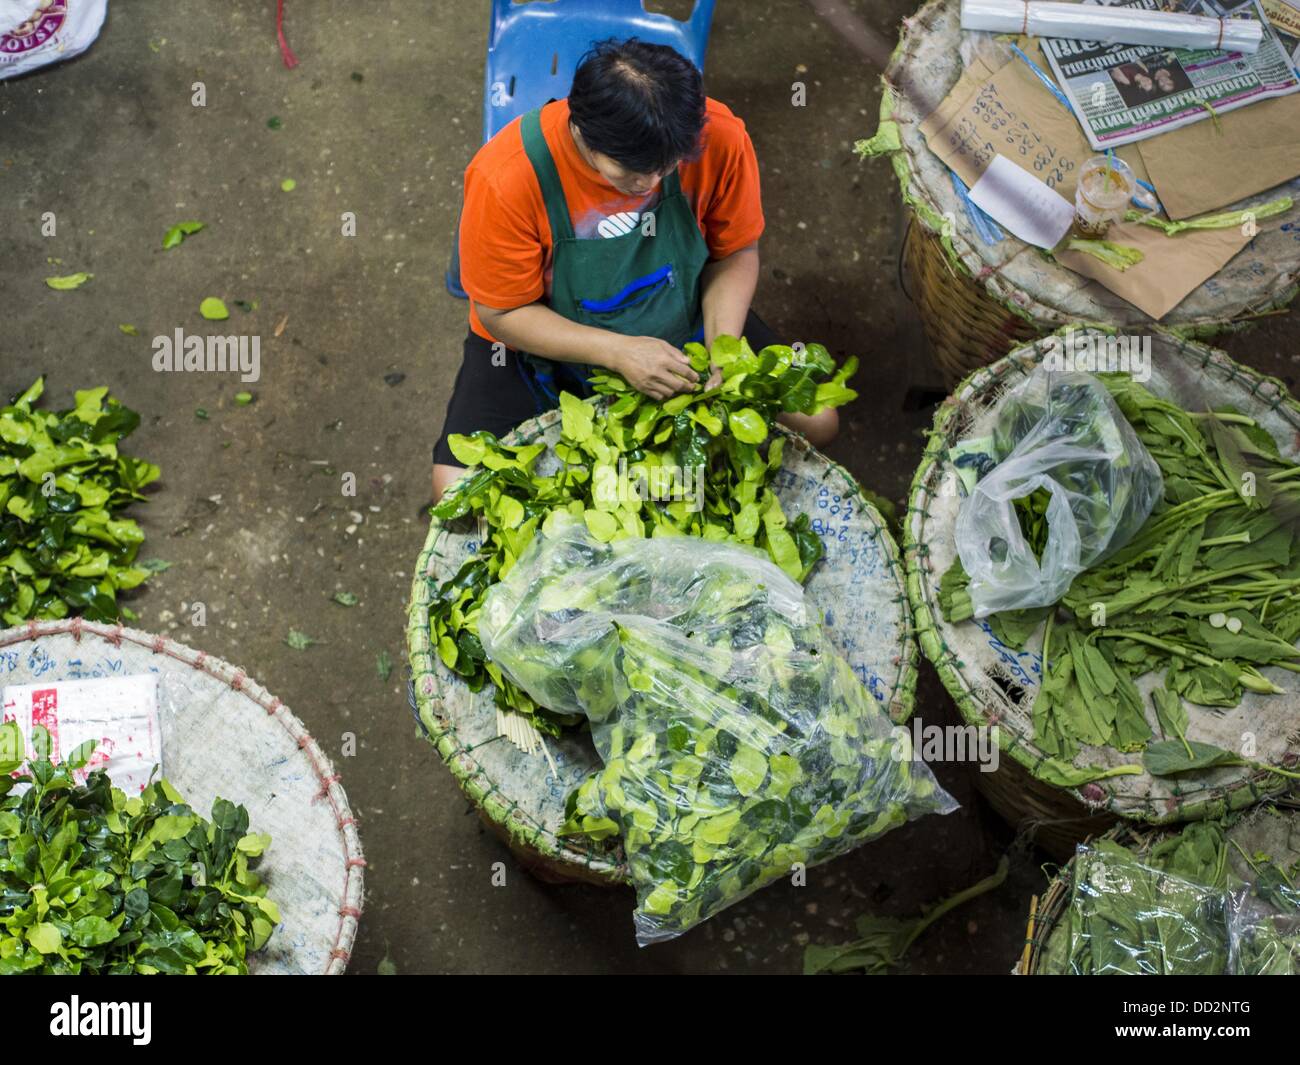 Aug. 23, 2013 - Bangkok, Thailand - A vendor sorts Kaffir lime leaves (Citrus hystrix DC., Rutaceae), also known as kieffer lime, makrut, or magrood in Pak Khlong Talad in Bangkok. Thailand entered a Ã¢??technicalÃ¢?Â recession this month after the economy shrank by 0.3% in the second quarter of the year. The 0.3% contraction in gross domestic product between April and June followed a previous fall of 1.7% during the first quarter of 2013. The contraction is being blamed on a drop in demand for exports, a drop in domestic demand and a loss of consumer confidence. At the same time, the value o Stock Photo